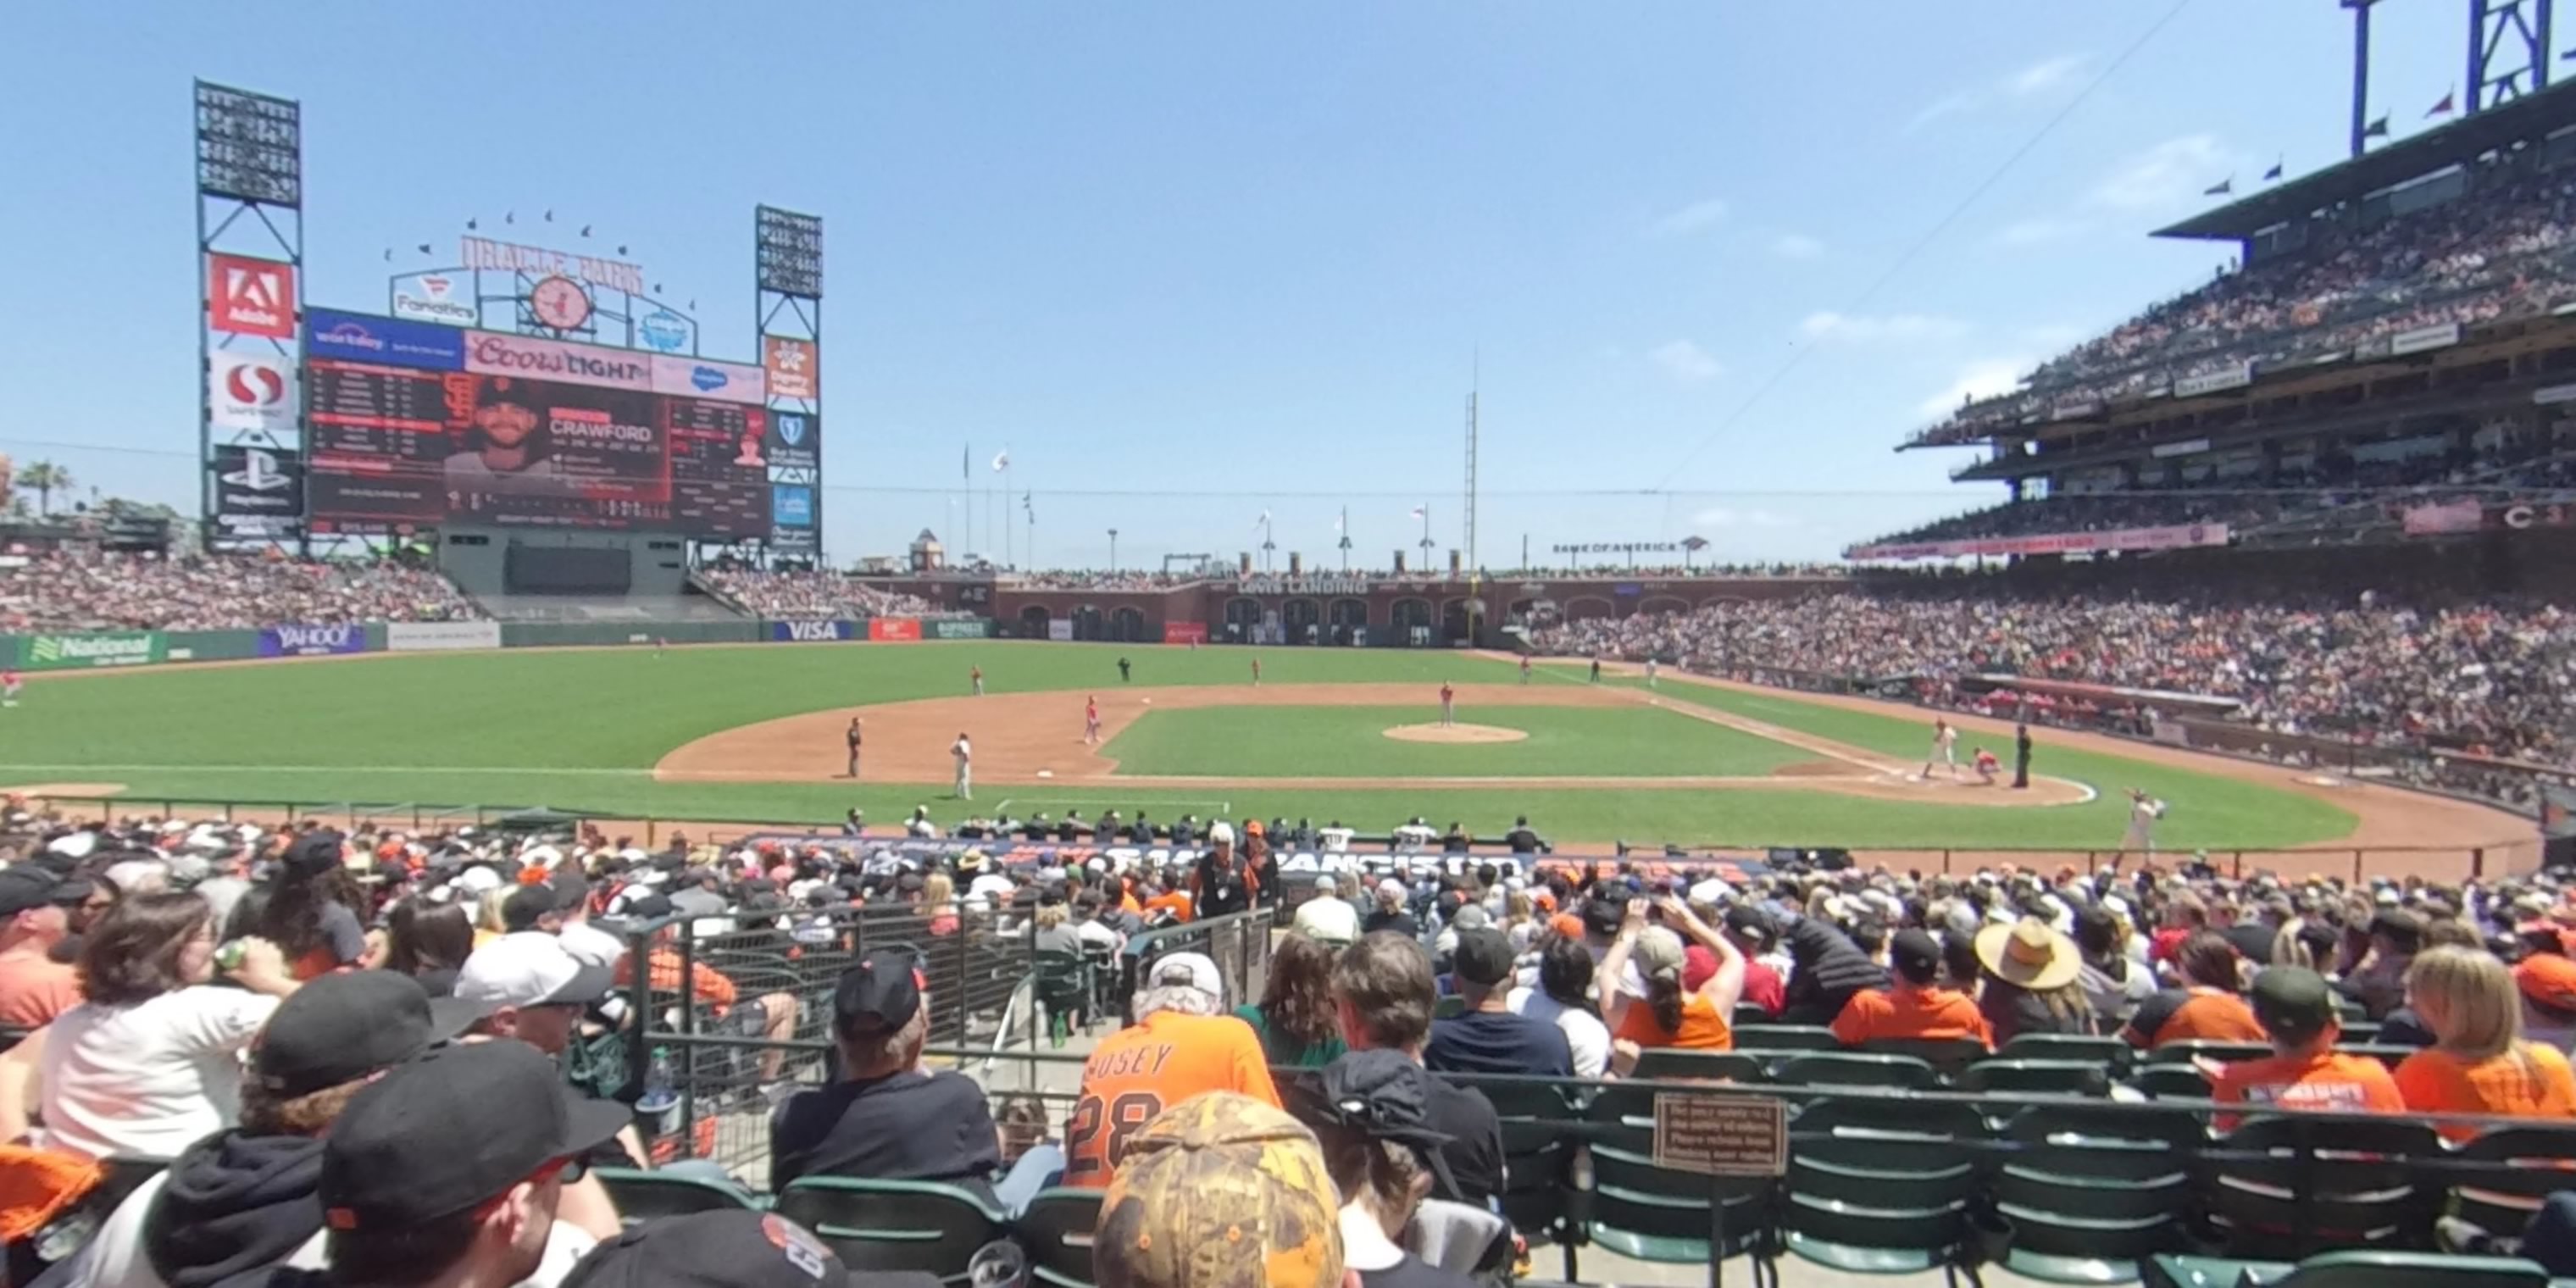 section 122 panoramic seat view  for baseball - oracle park